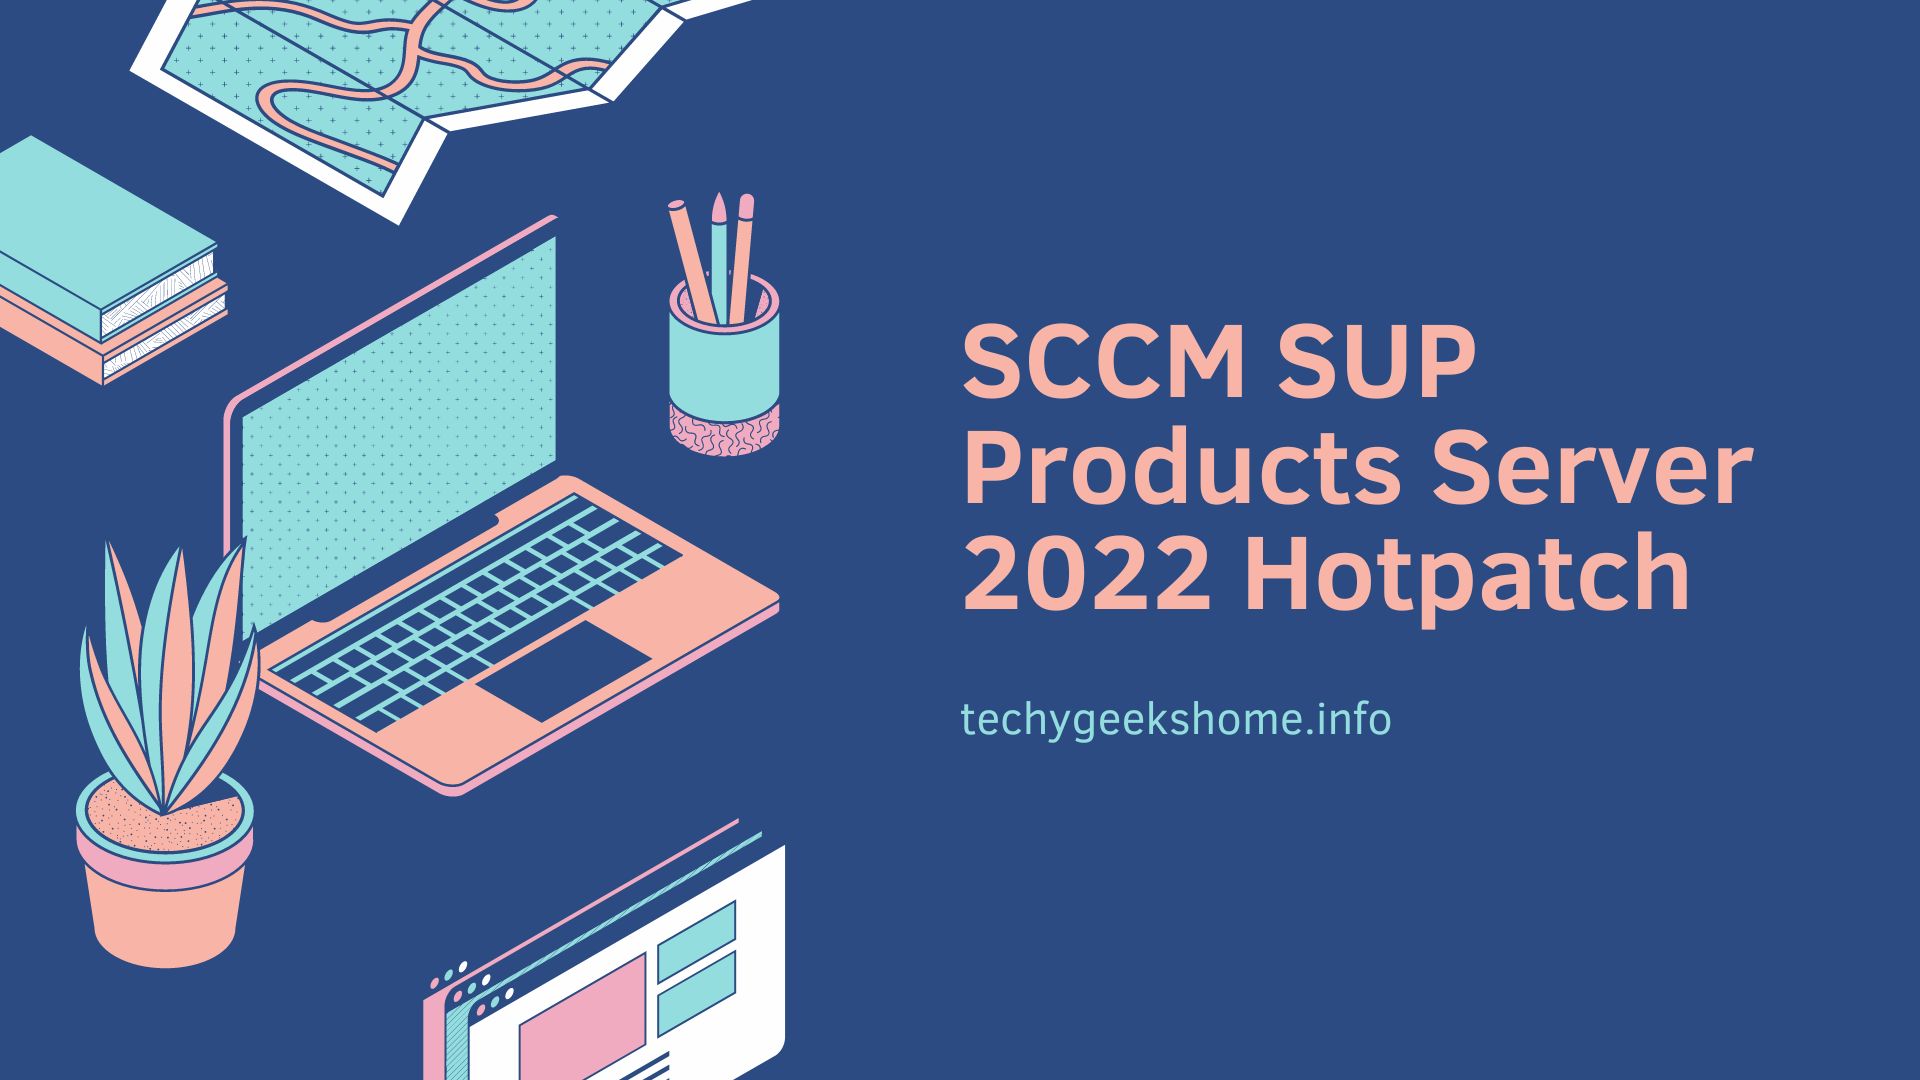 SCCM SUP Products Server 2022 Hotpatch